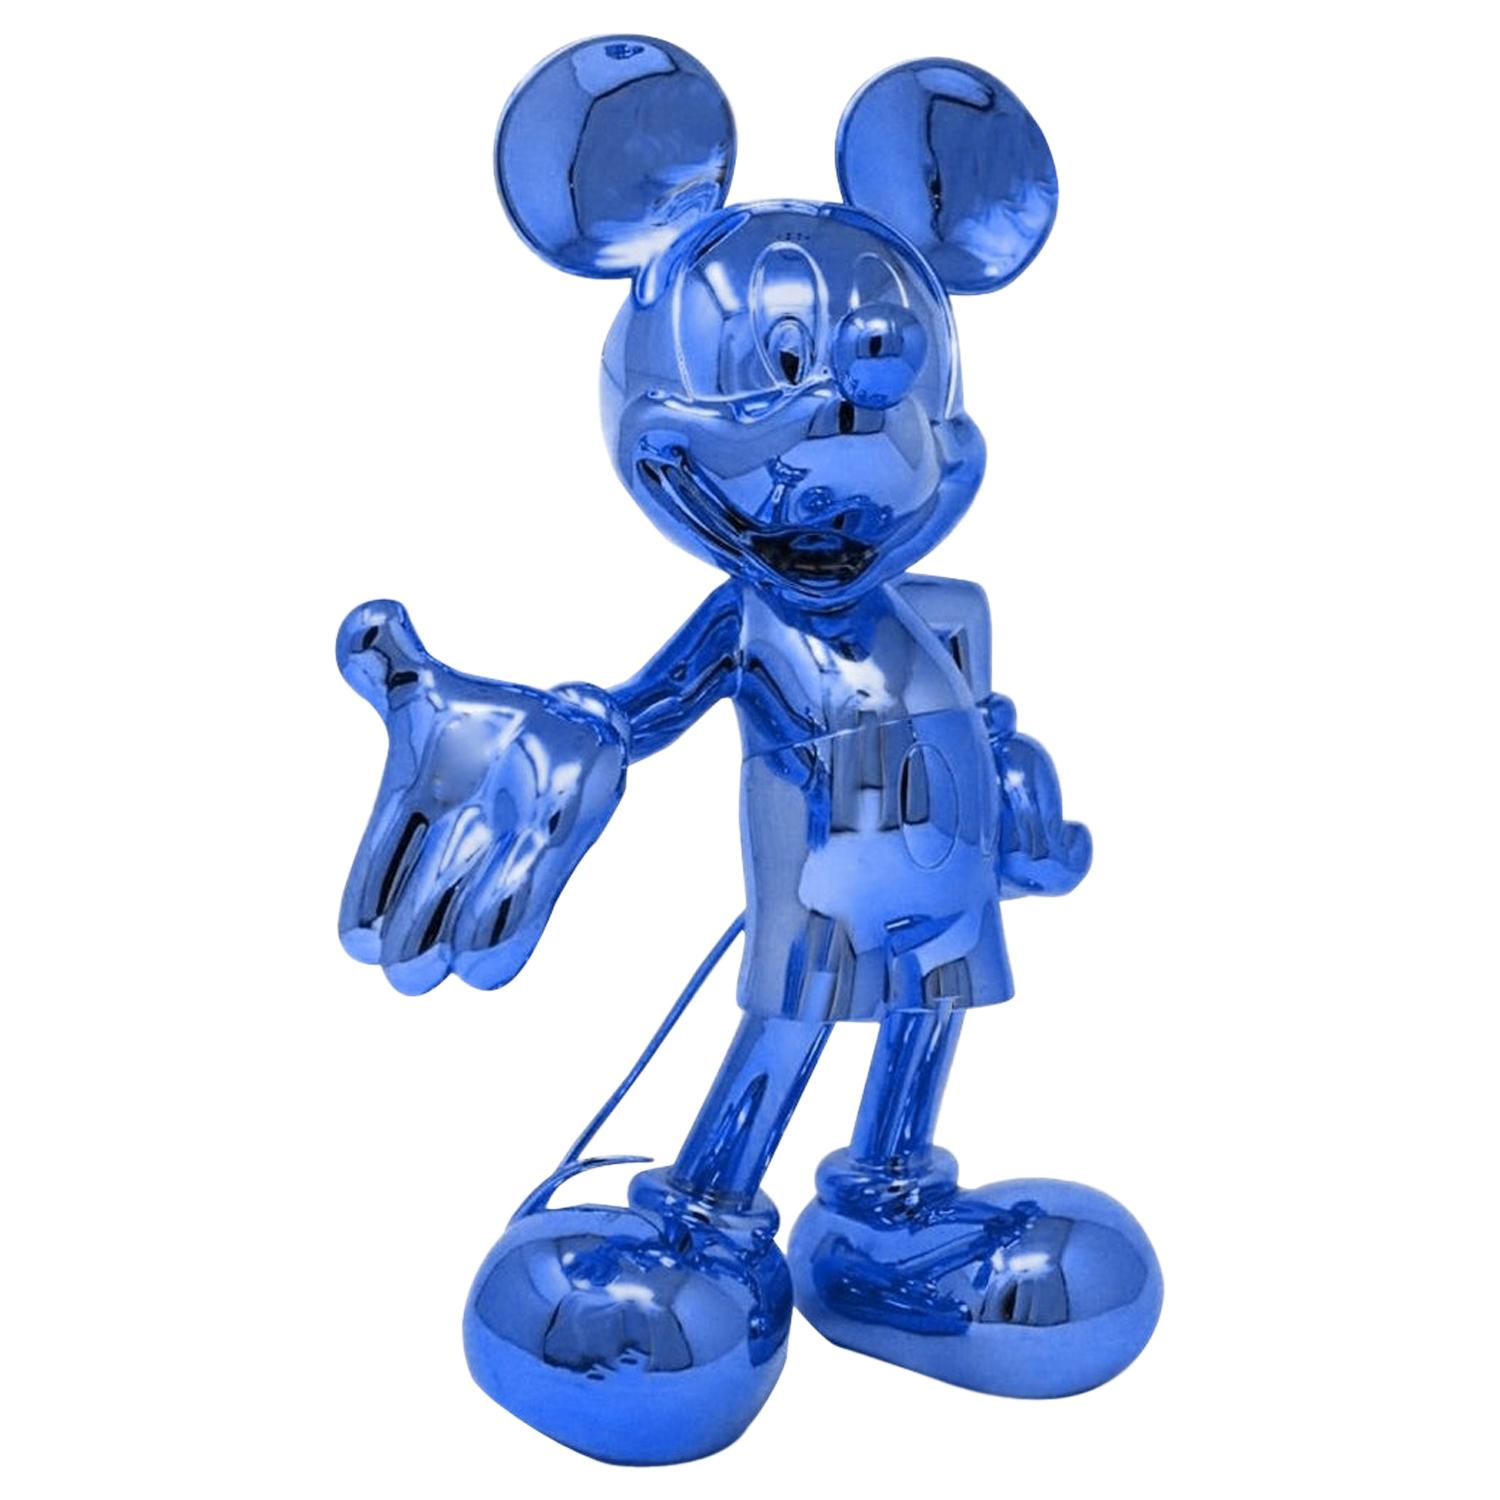 In Stock in Los Angeles, Mickey Mouse Metallic Chrome Blue Pop Sculpture Figurine